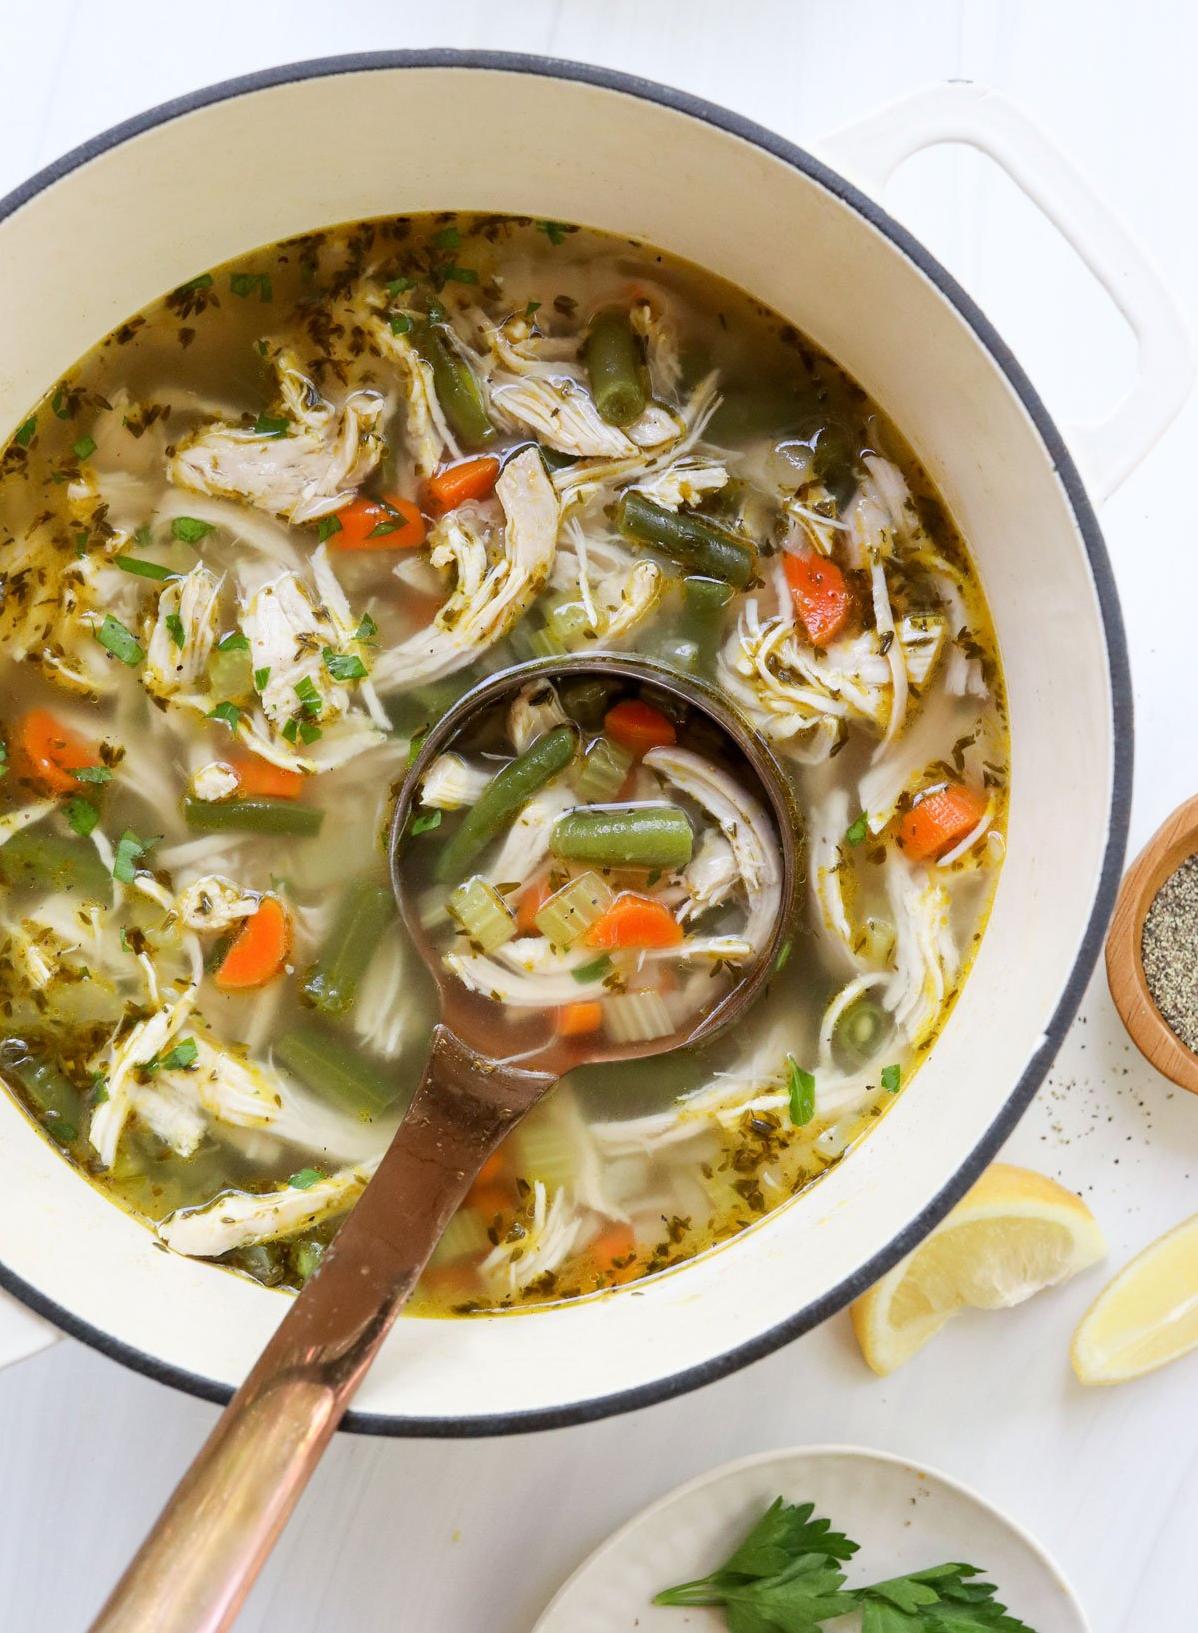 Delicious and Nutritious Chicken Vegetable Soup Recipe